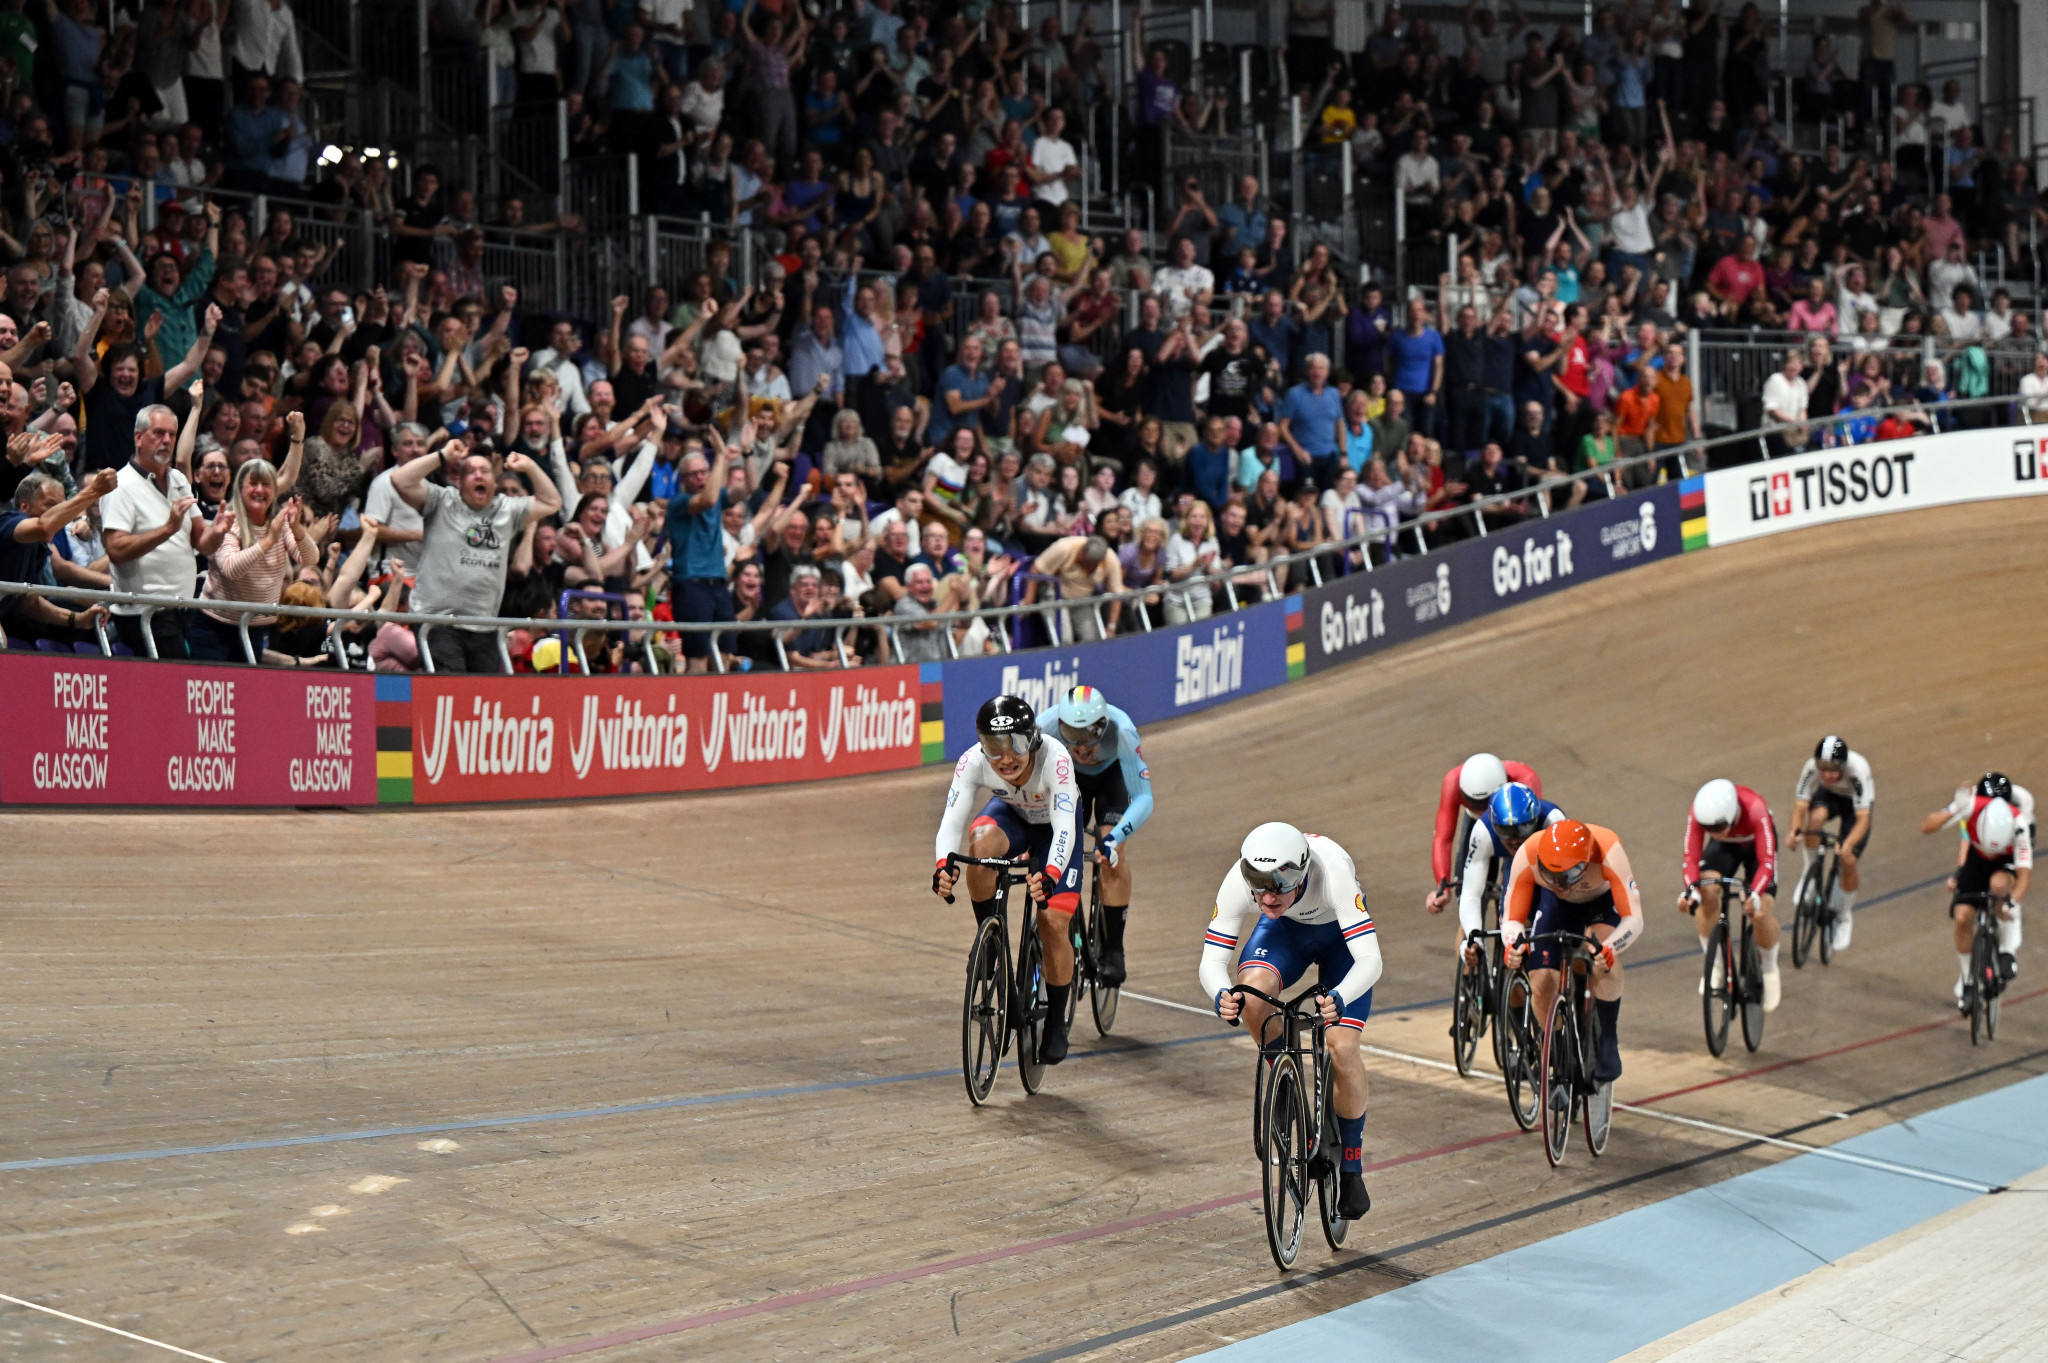 Britain's William Tidball burst out of the pack to win Britain's first gold medal of the UCI World Cycling Championships in Glasgow ©Getty Images